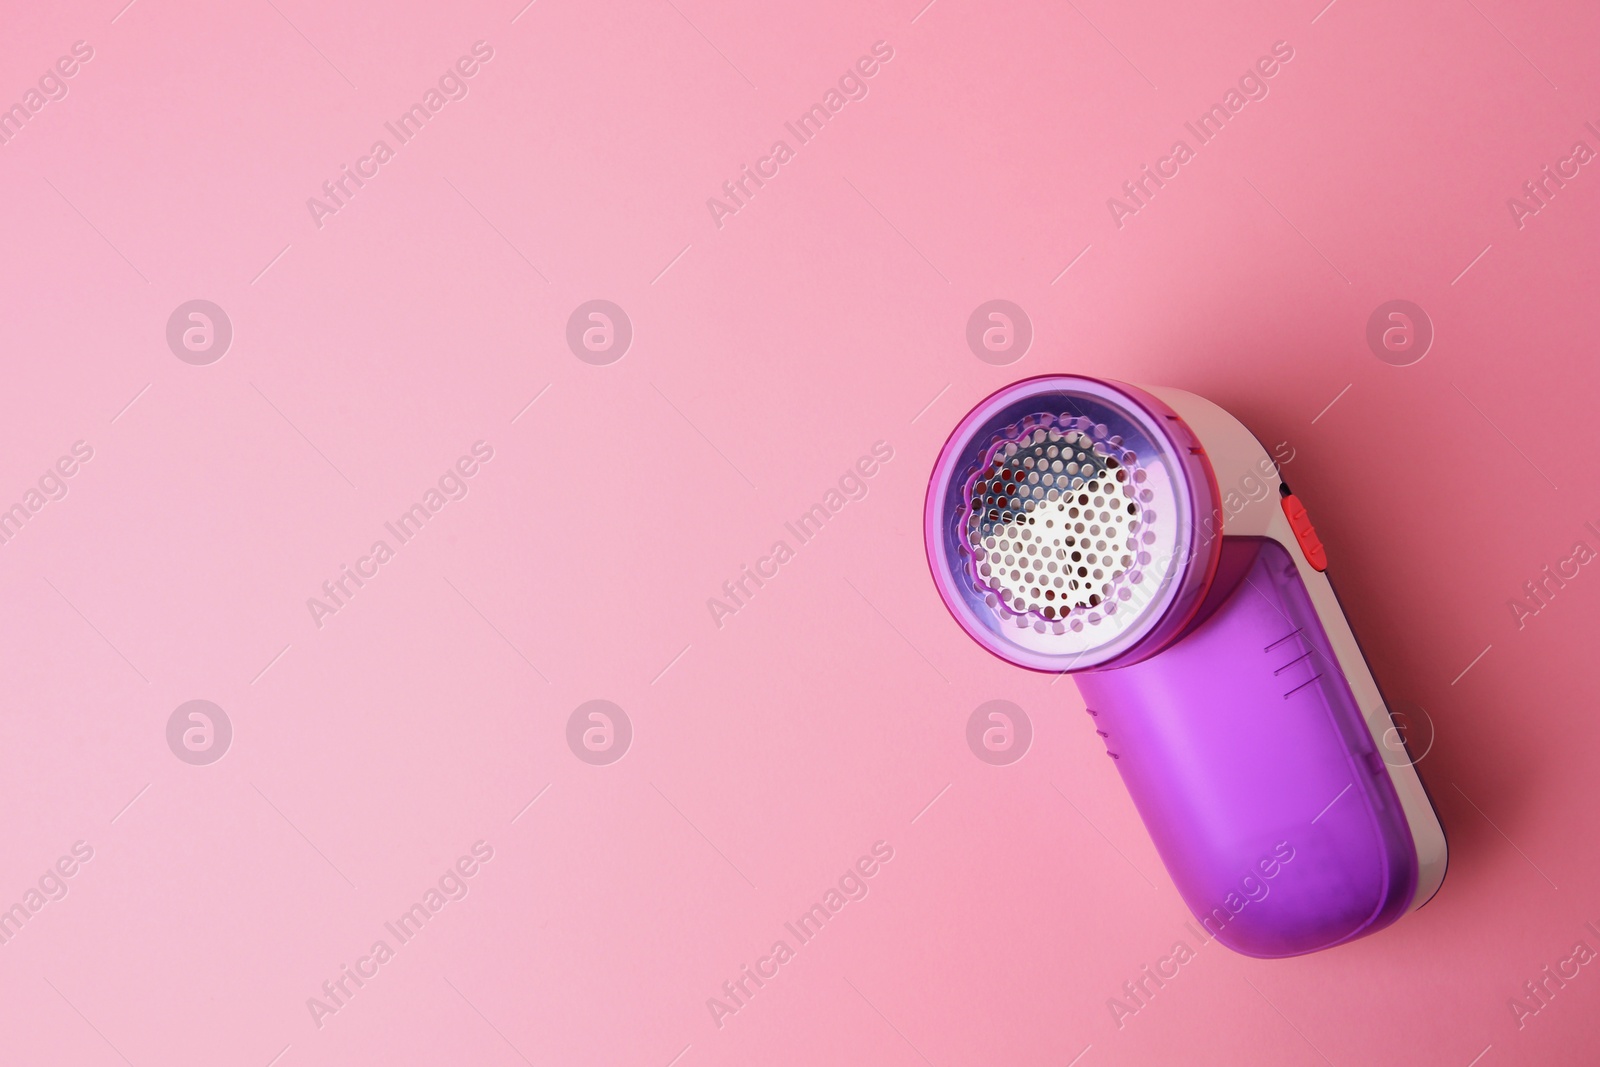 Photo of Modern fabric shaver on pink background, top view. Space for text